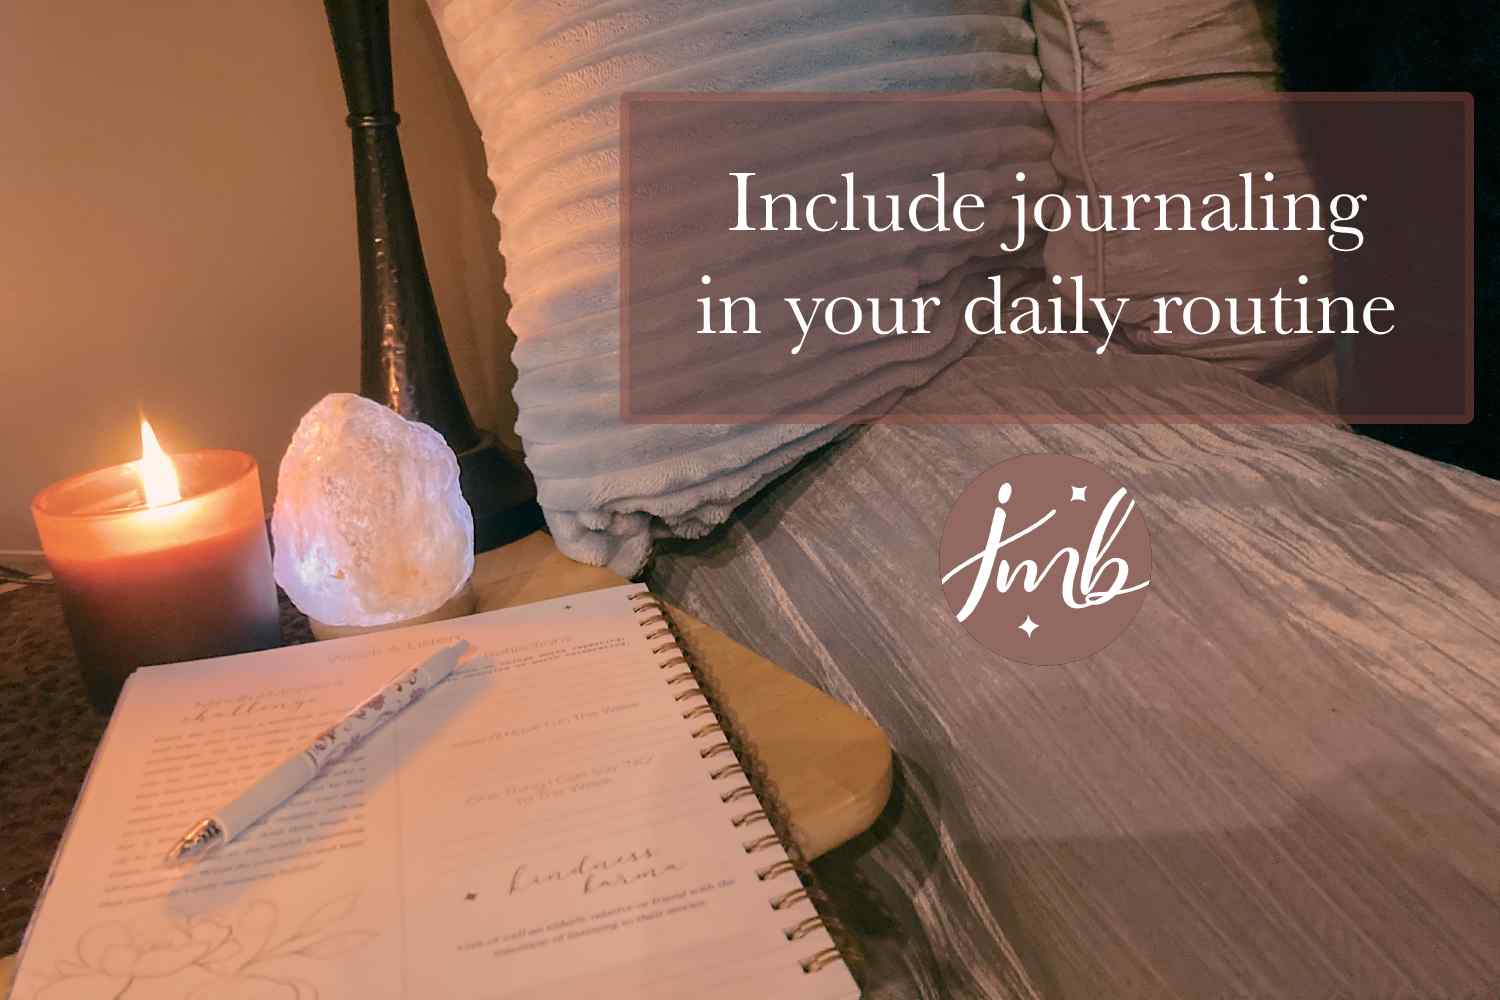 Journal as your routine